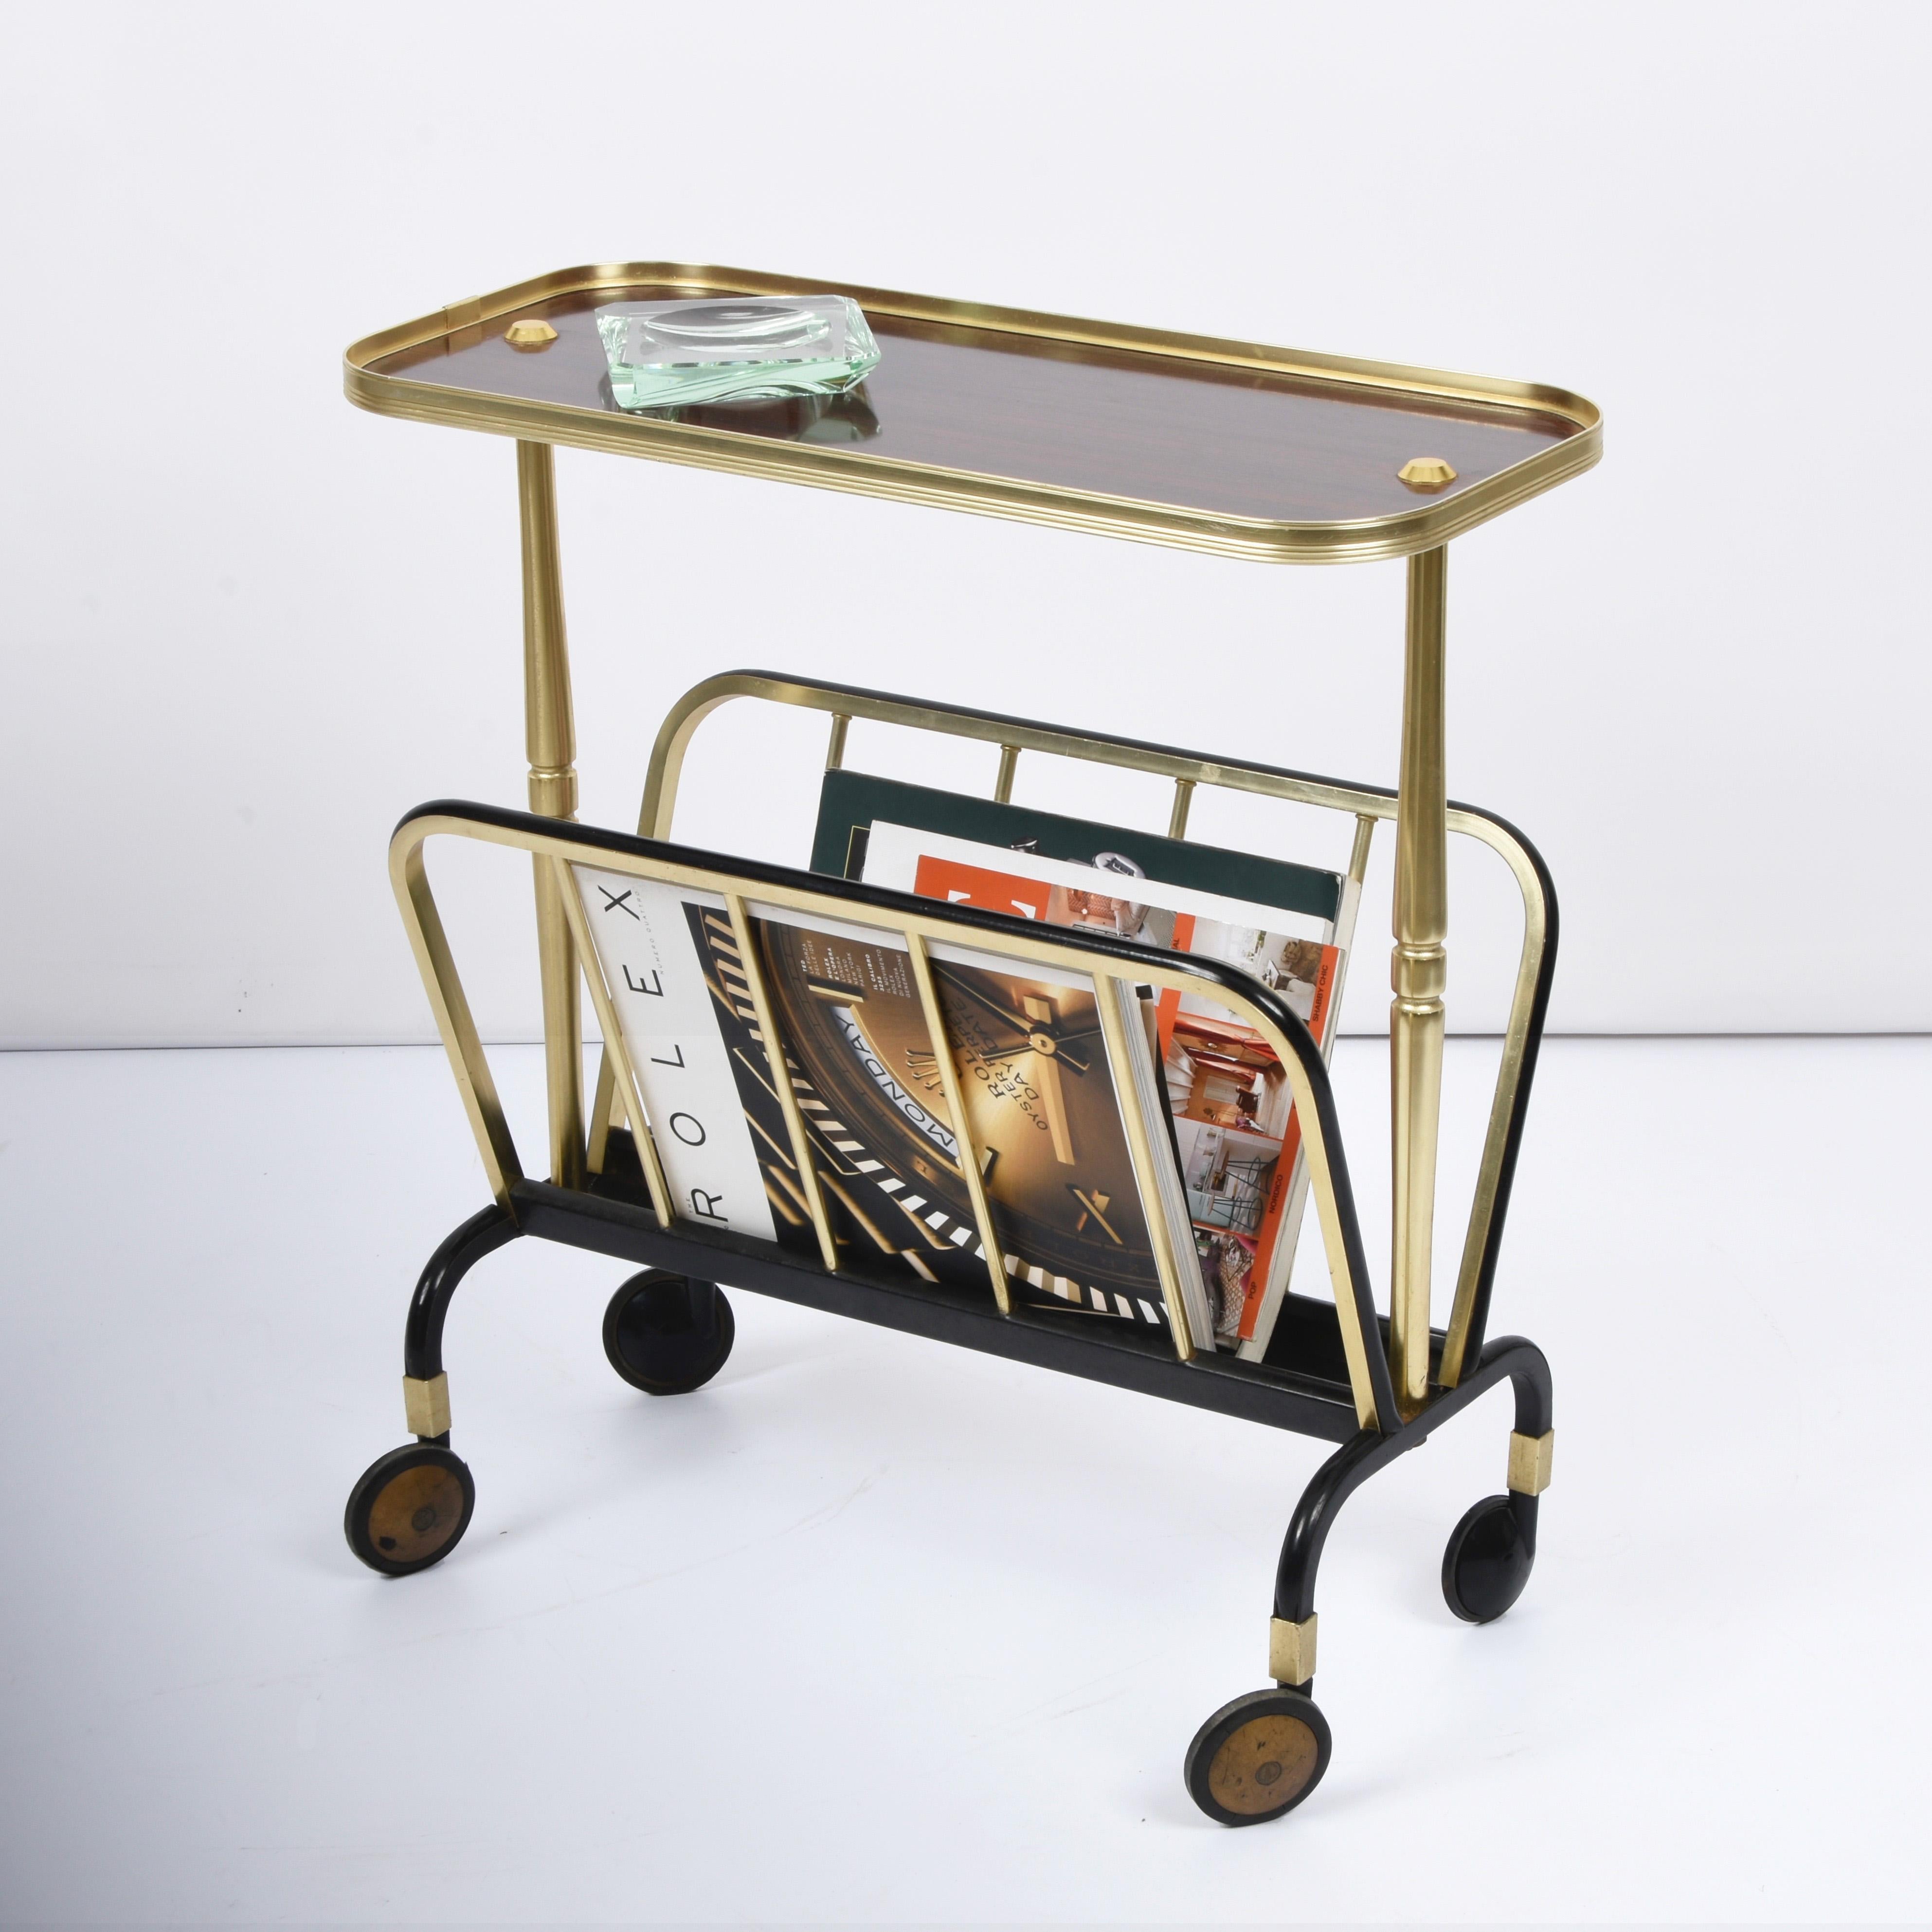 Ico Parisi Midcentury Aluminum and Formica Trolley Magazine Rack for MB, 1960s For Sale 9